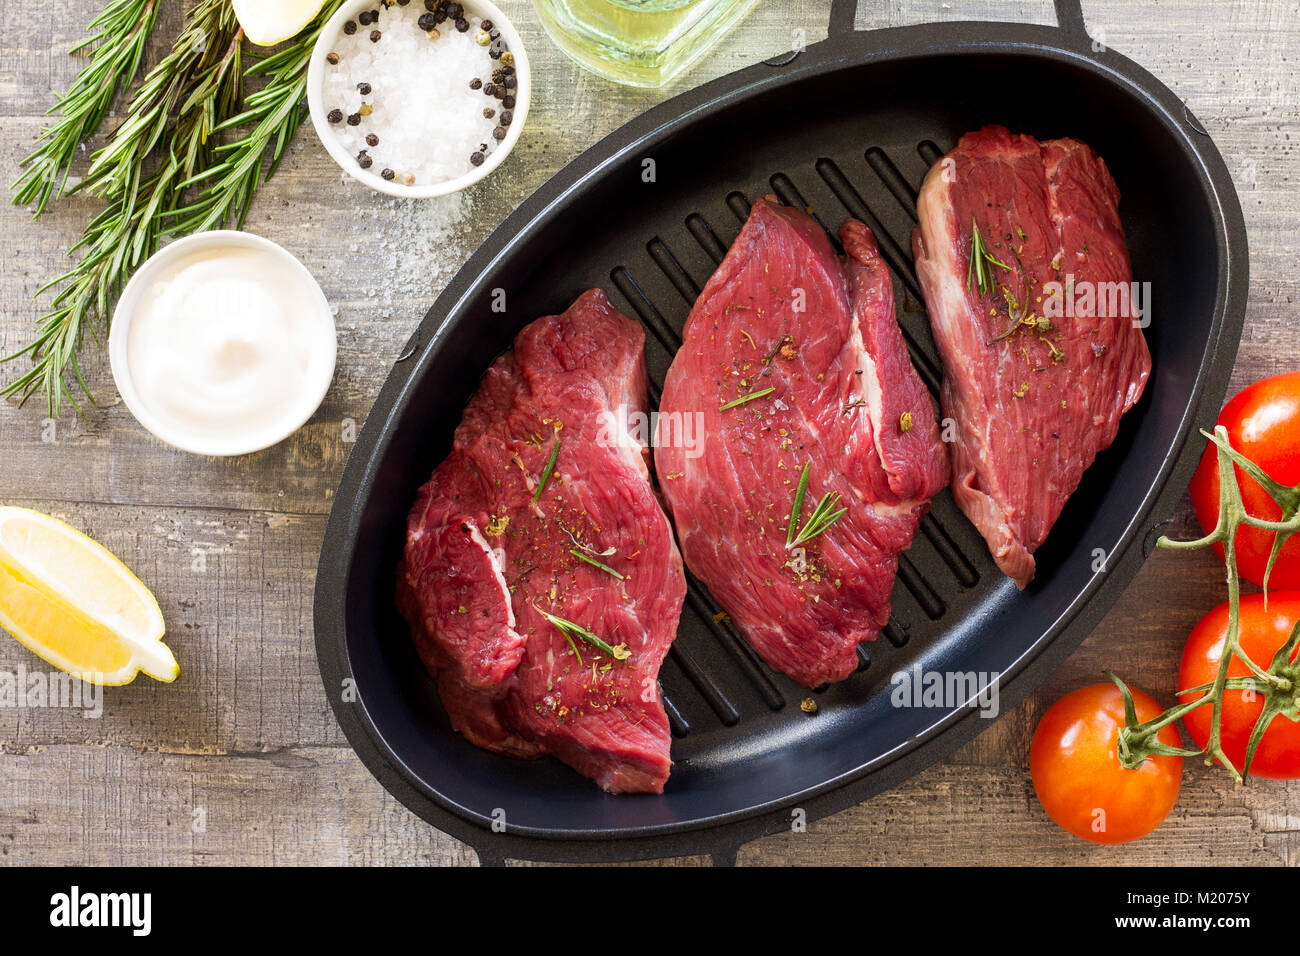 Fresh meat. Raw steak beef on a cast-iron grill frying pan, tomatoes, olive oil, spices and fresh rosemary on the kitchen table. Stock Photo